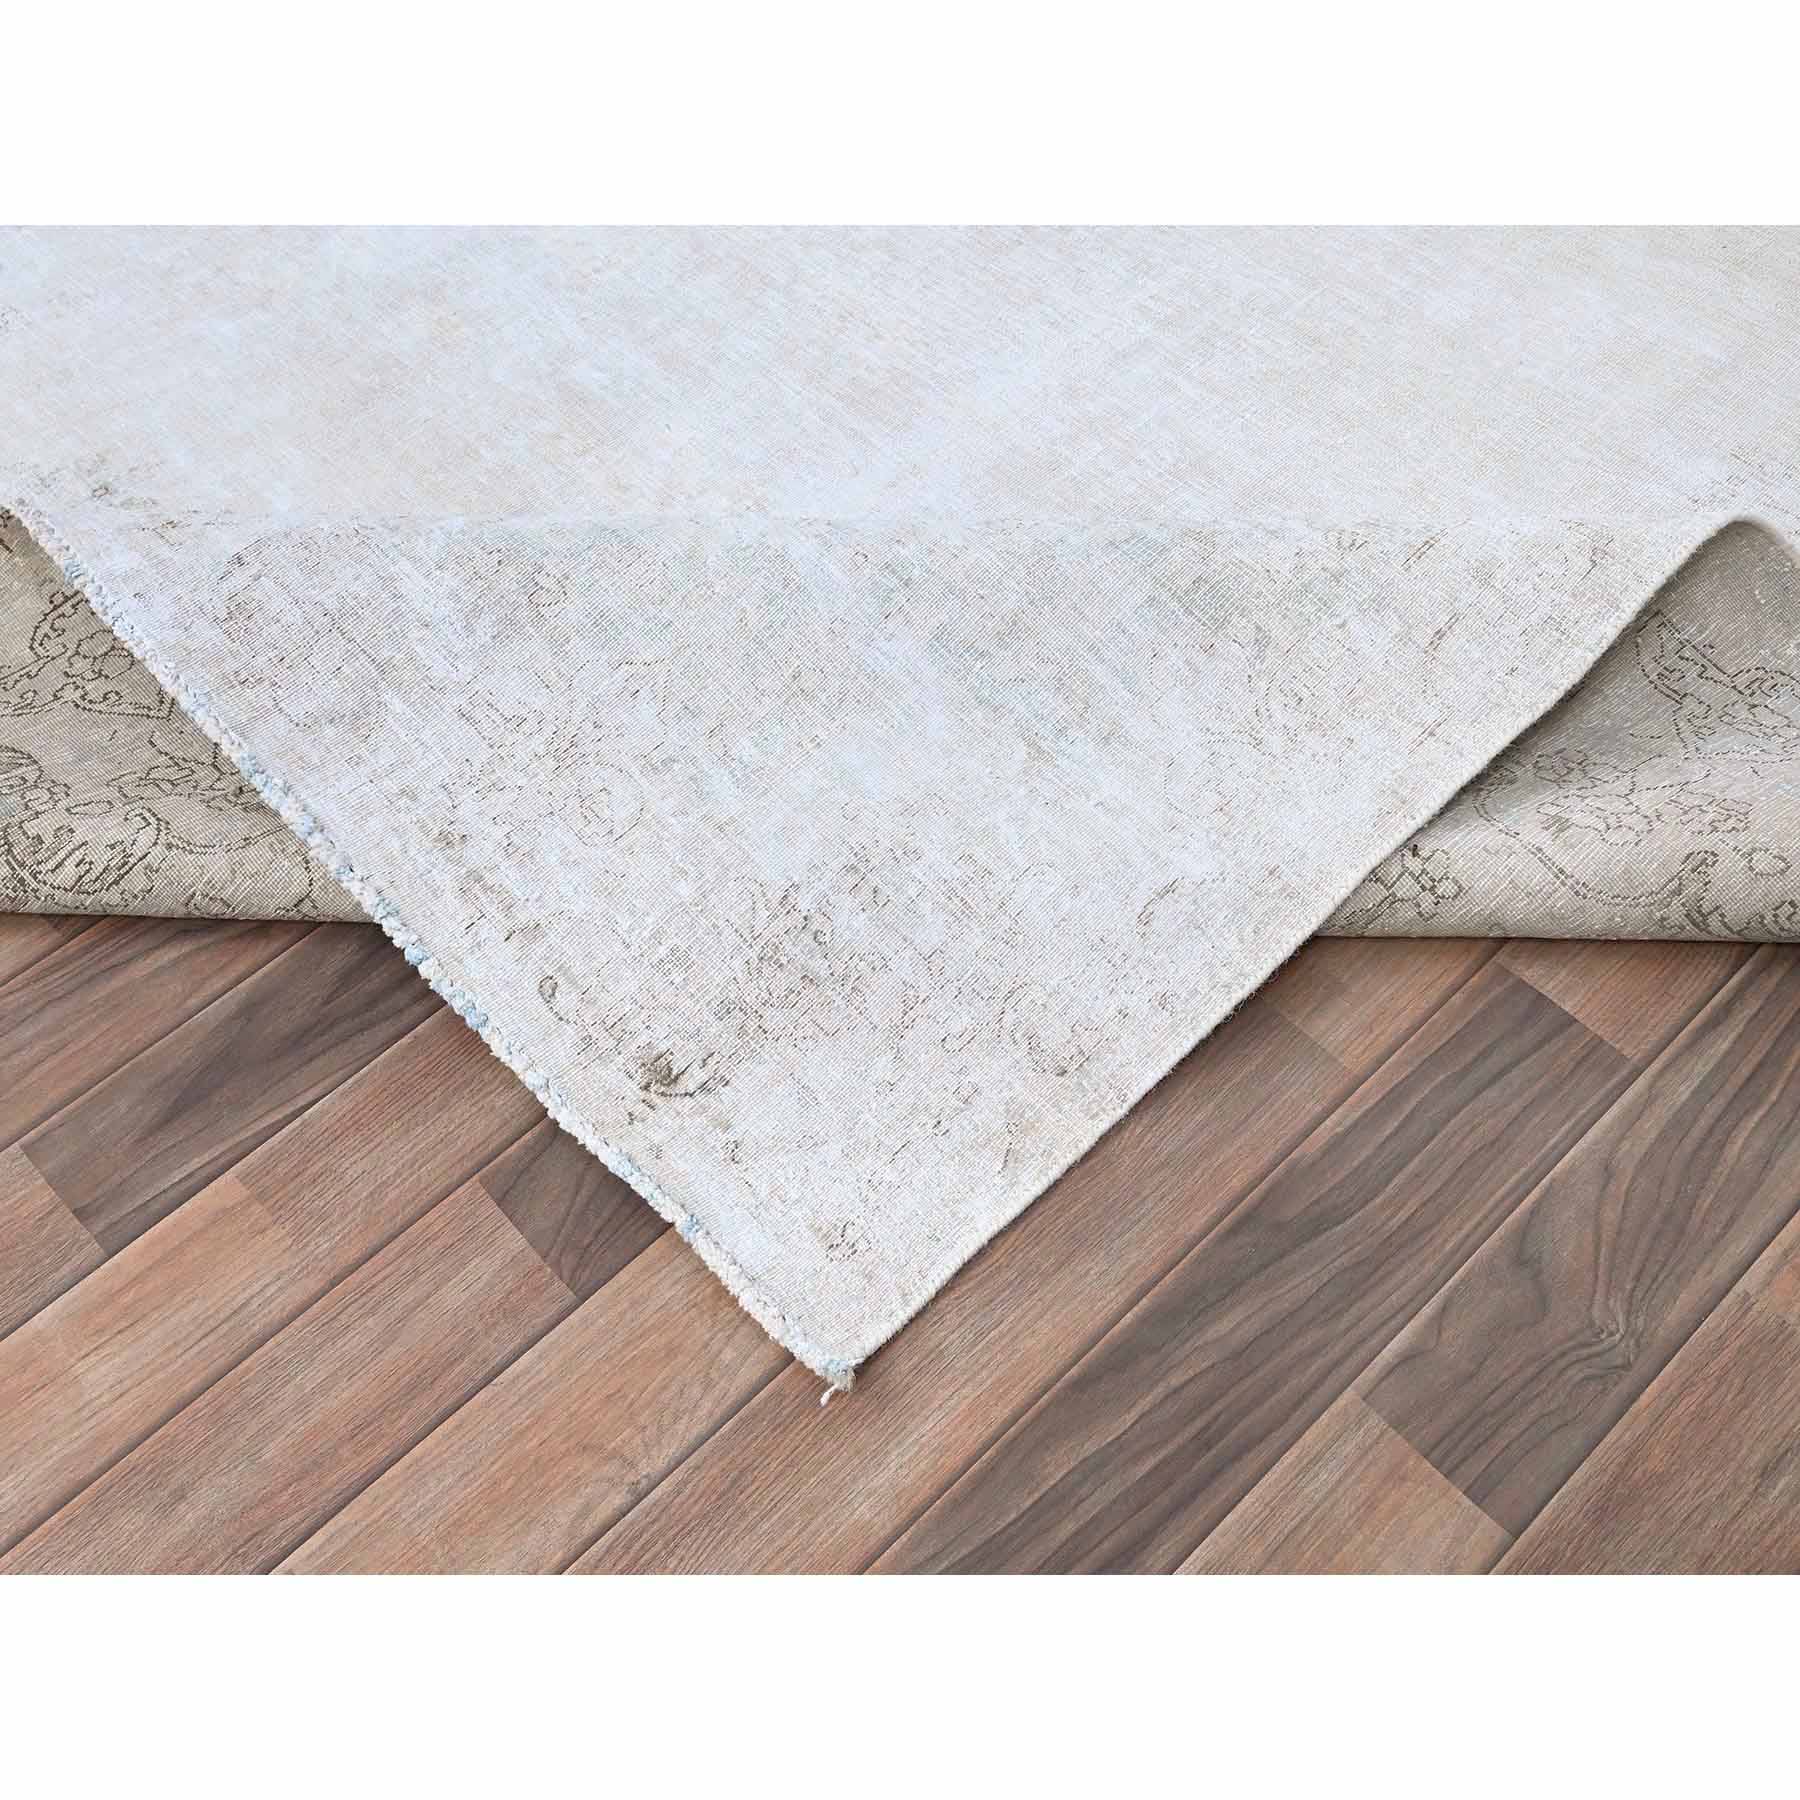 Overdyed-Vintage-Hand-Knotted-Rug-427615